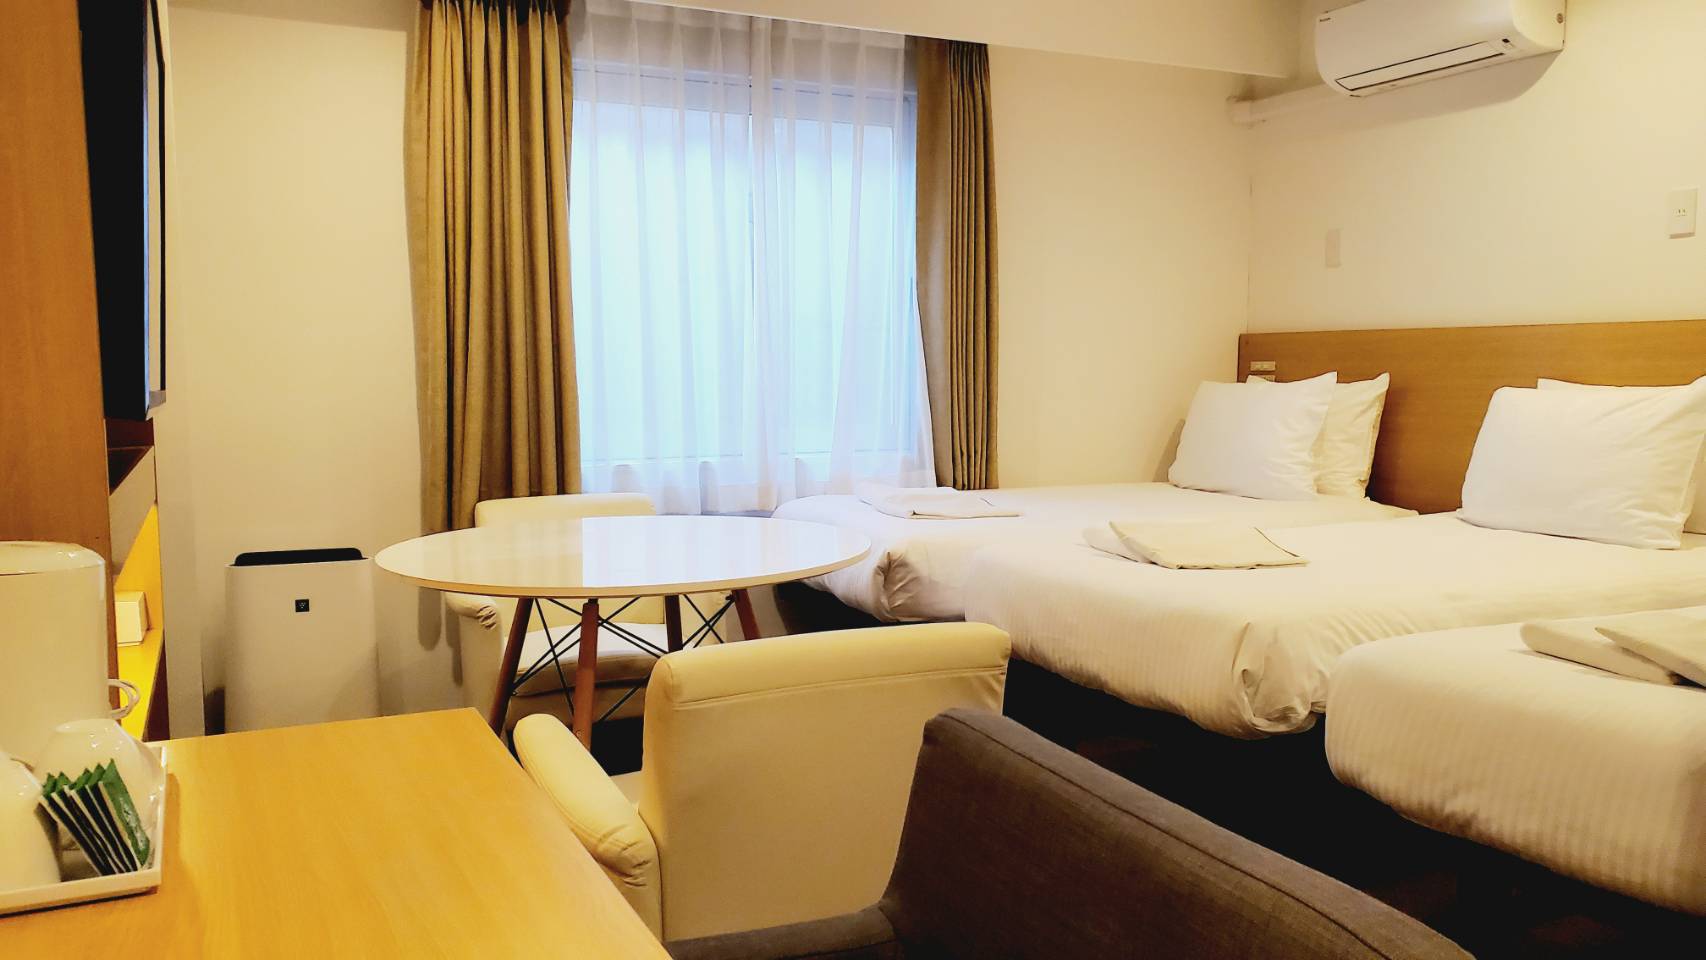 Hotel Passage II Set in a prime location of Aomori, Hotel Passage II puts everything the city has to offer just outside your doorstep. The property has everything you need for a comfortable stay. Service-minded staff 